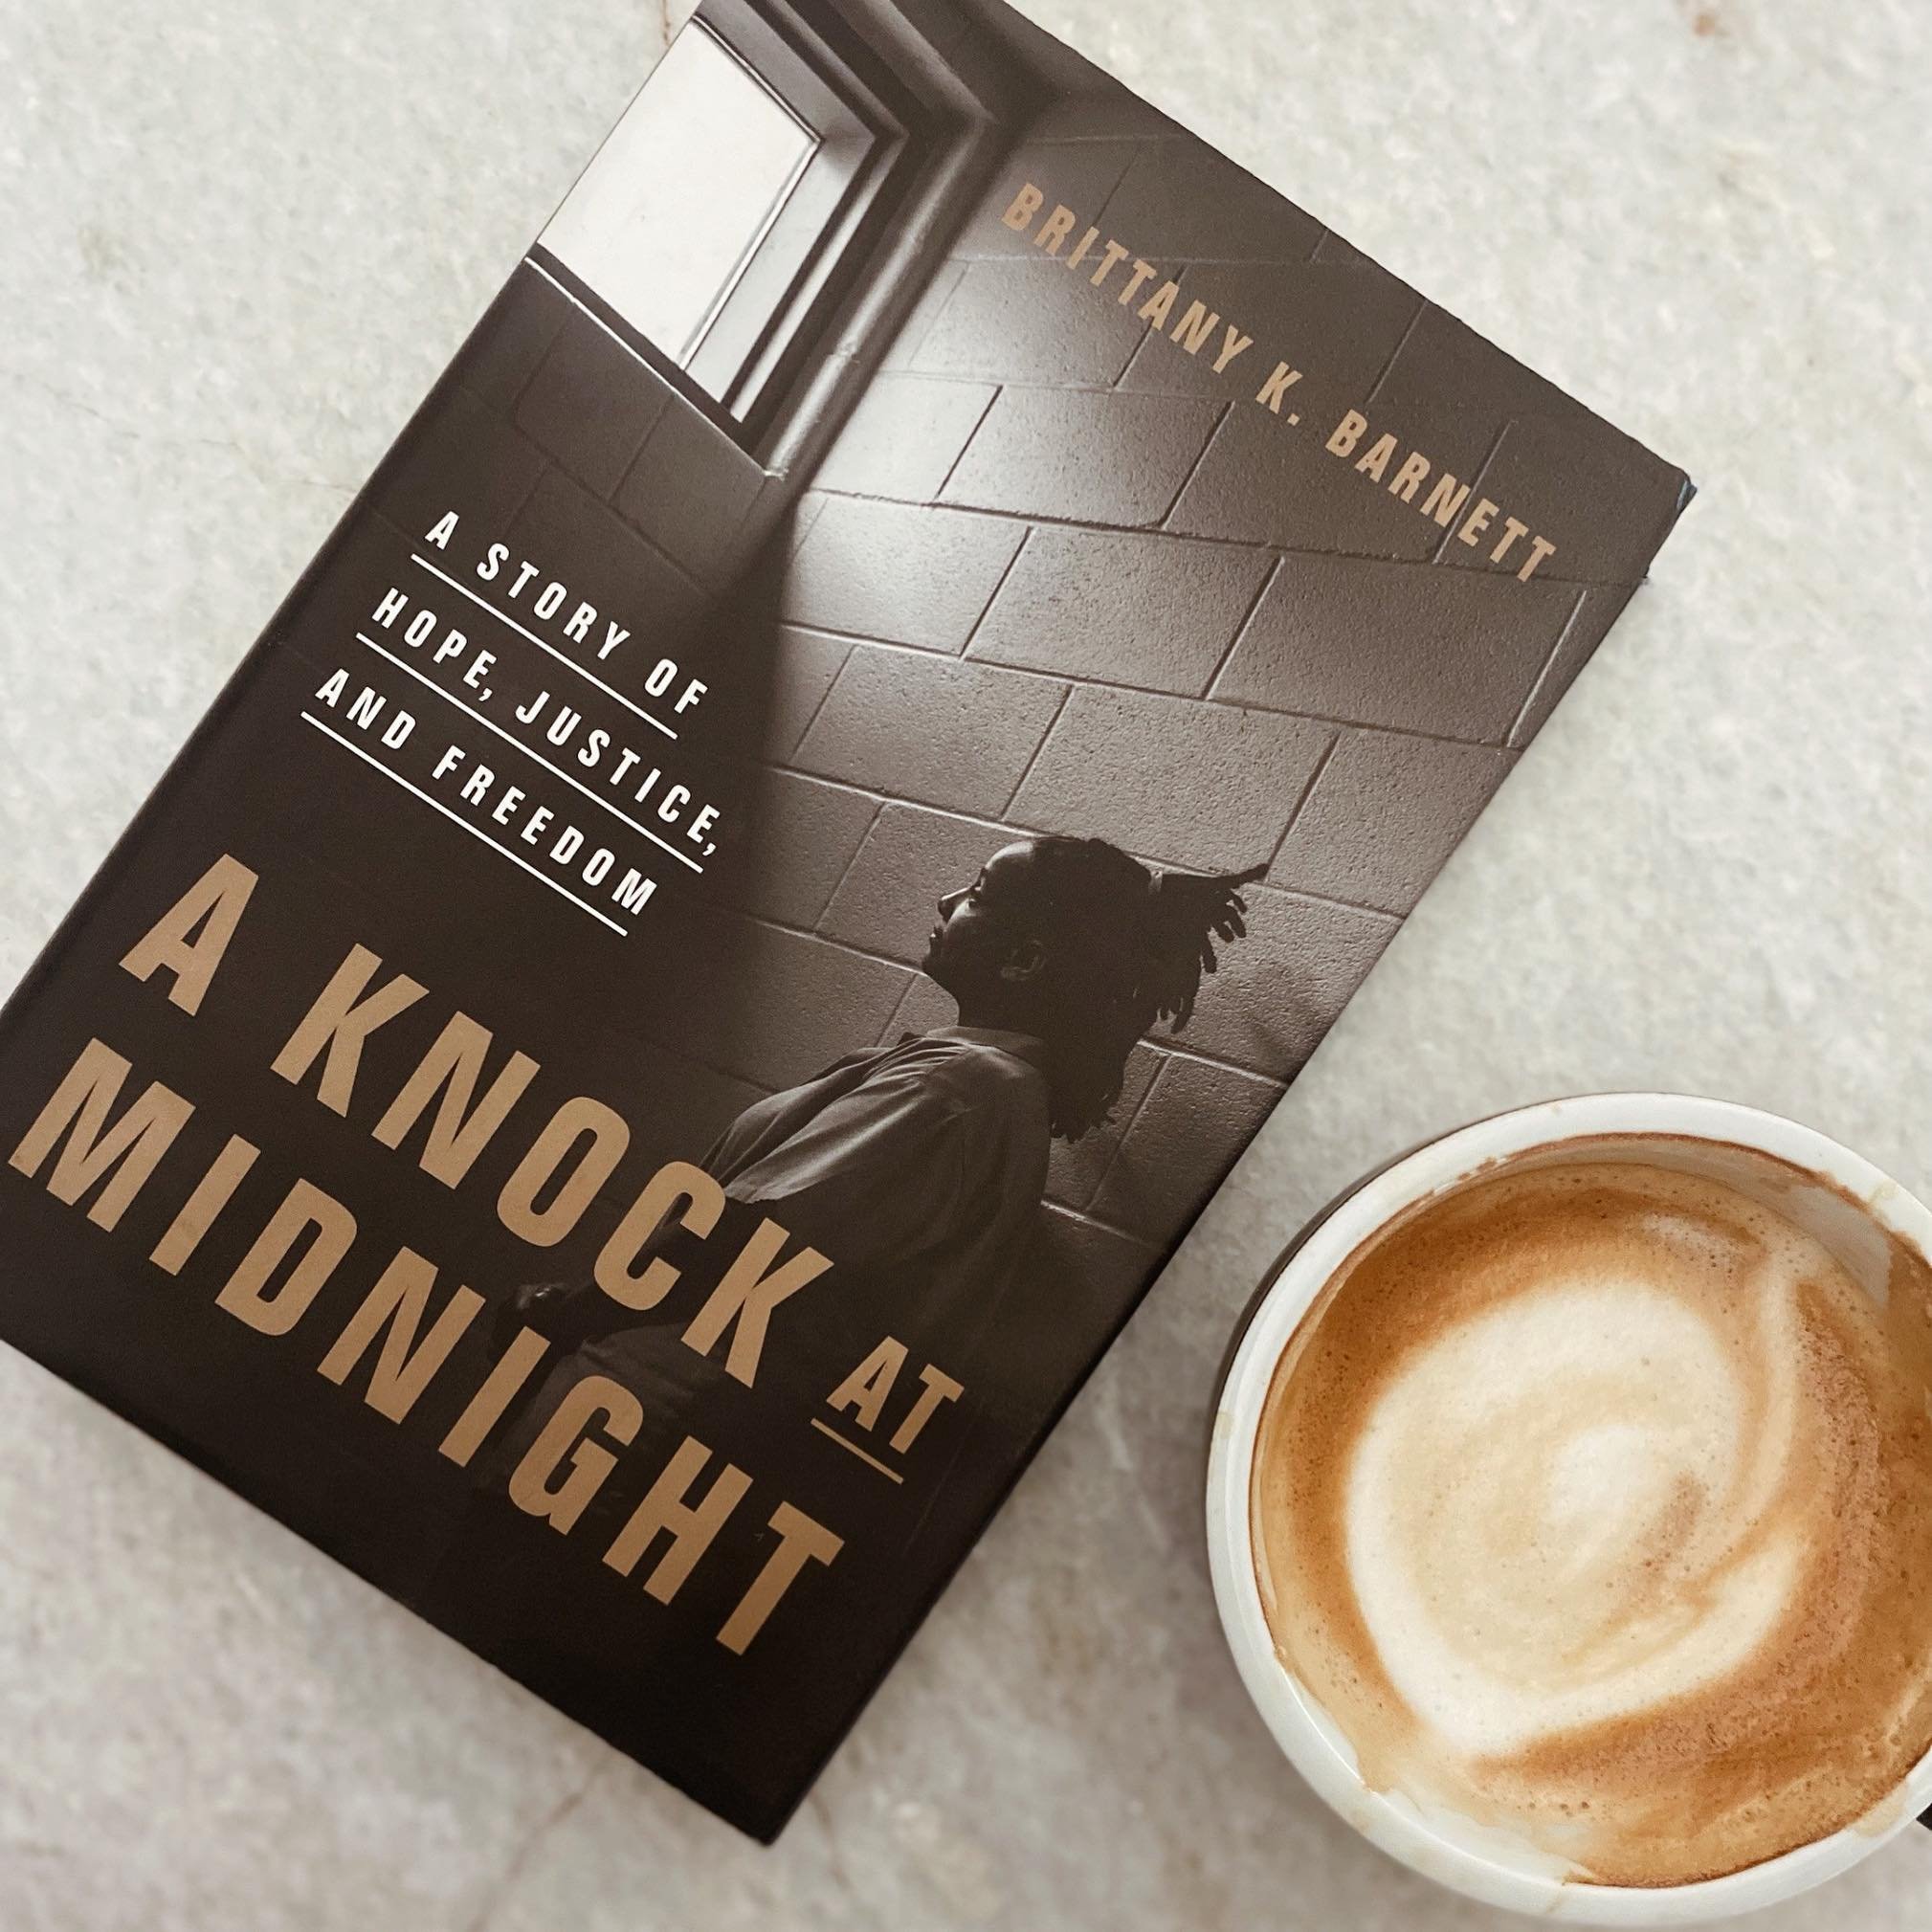 A little late this week, but on this week&rsquo;s coffee &amp; books: Sippin&rsquo; Kilimanjaro coffee (a cappuccino) + finished &ldquo;A Knock at Midnight&rdquo; = my mind is blown. This book is a fierce look at America&rsquo;s broken justice system